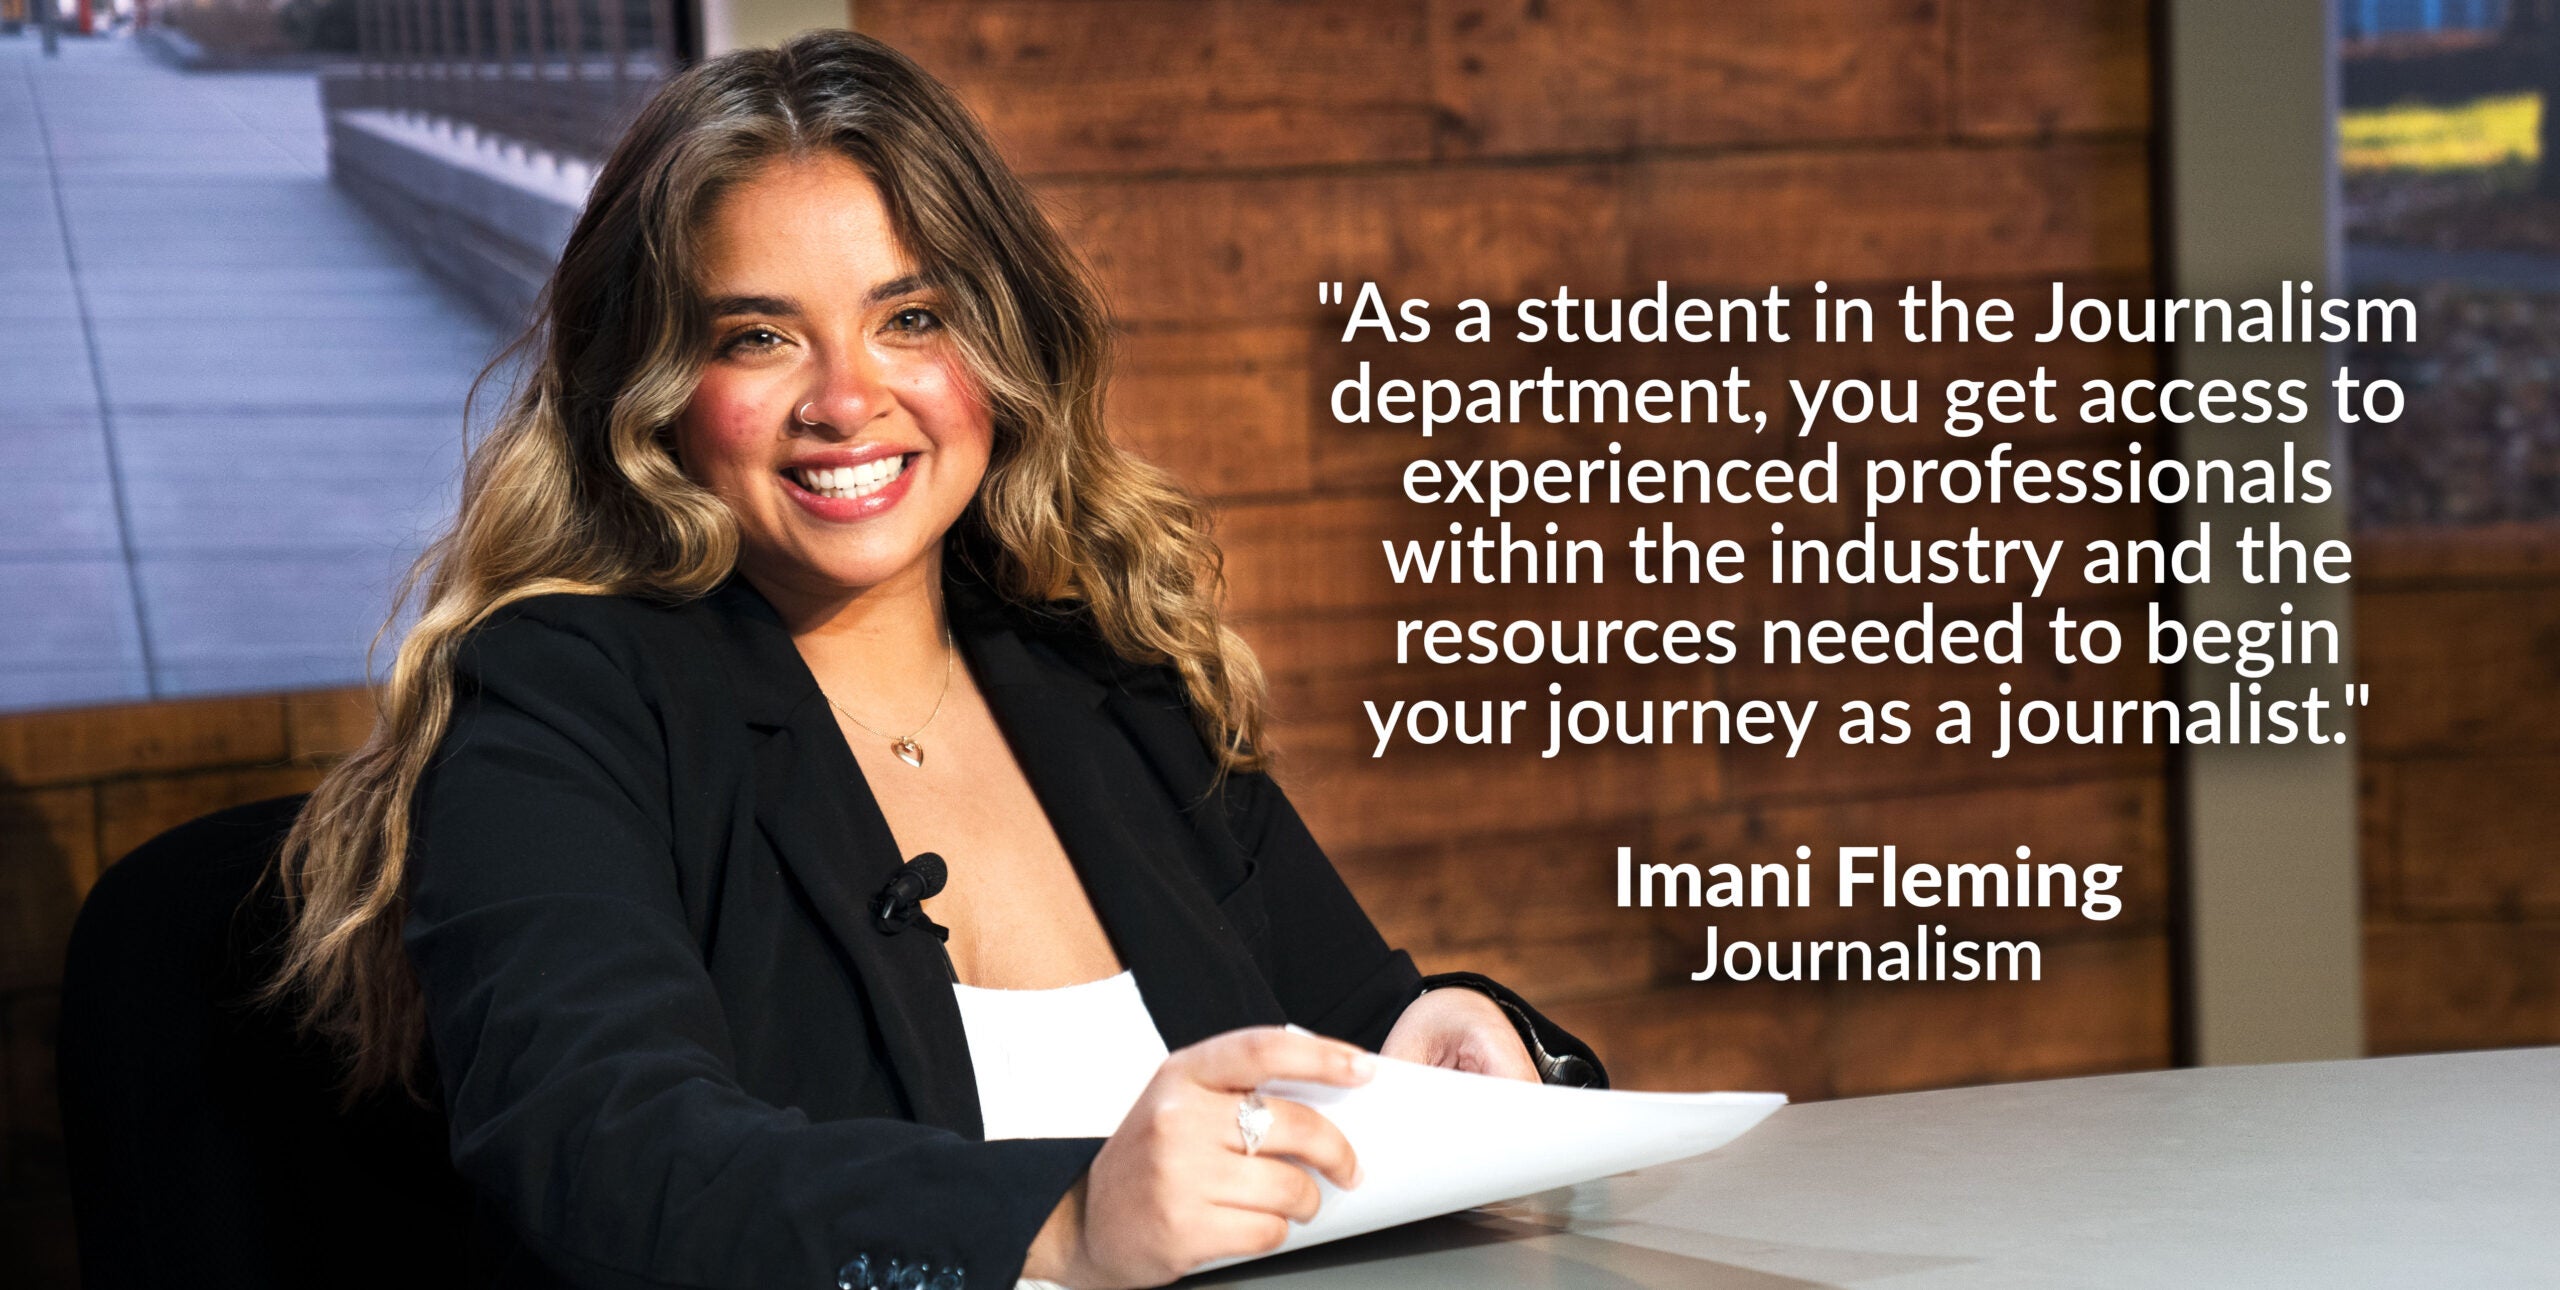 Photo of Imani Fleming of Journalism with quote "As a student in the Journalism department, you get access to experienced professionals within the industry and the resources needed to begin your journey as a journalist."